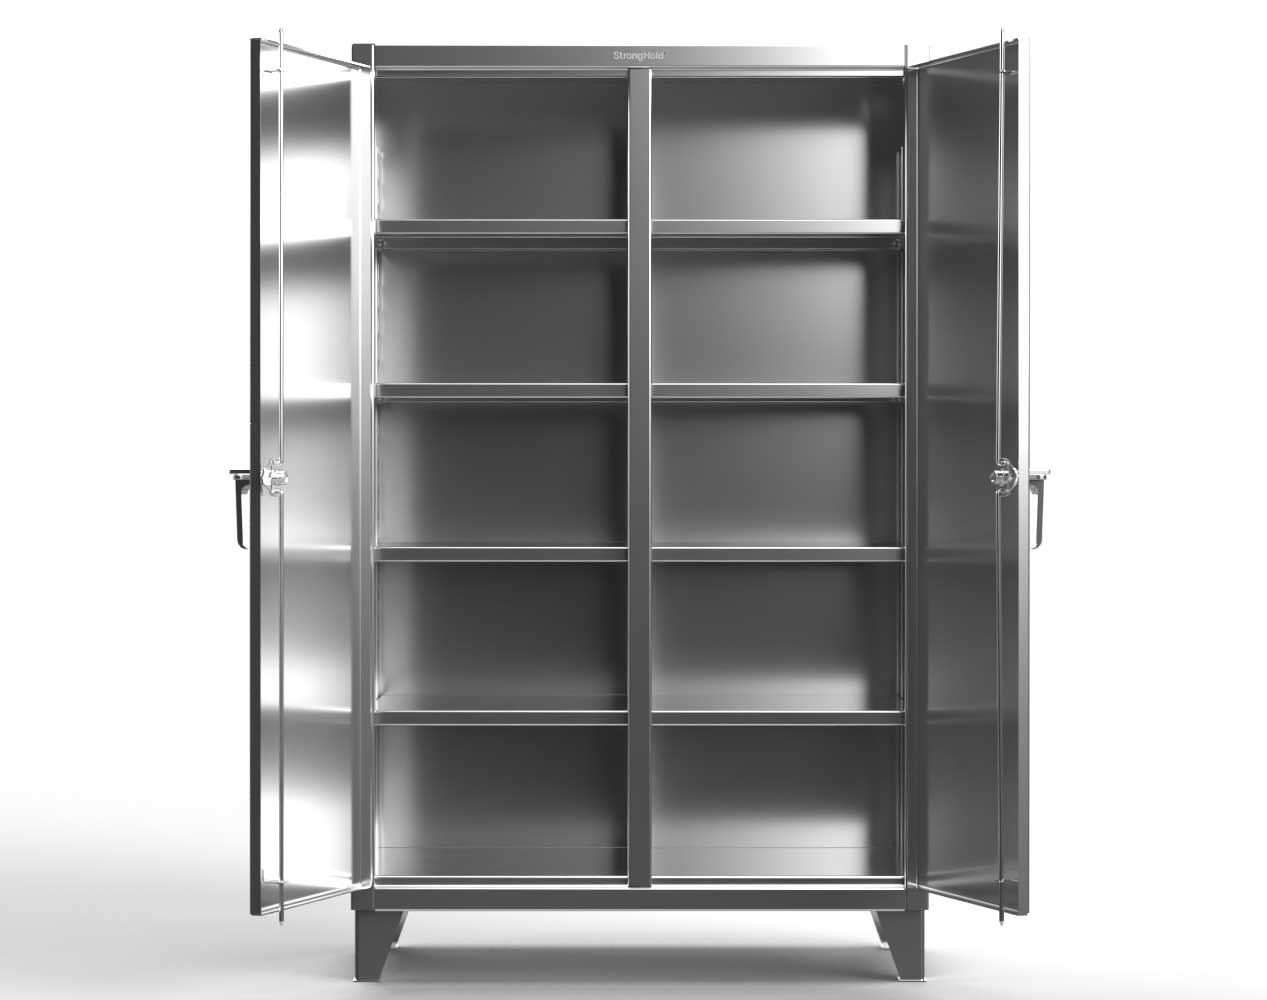 Extreme Duty 12 GA Stainless Steel Double Shift Cabinet with 8 Shelves - 36 In. W x 24 In. D x 78 In. H